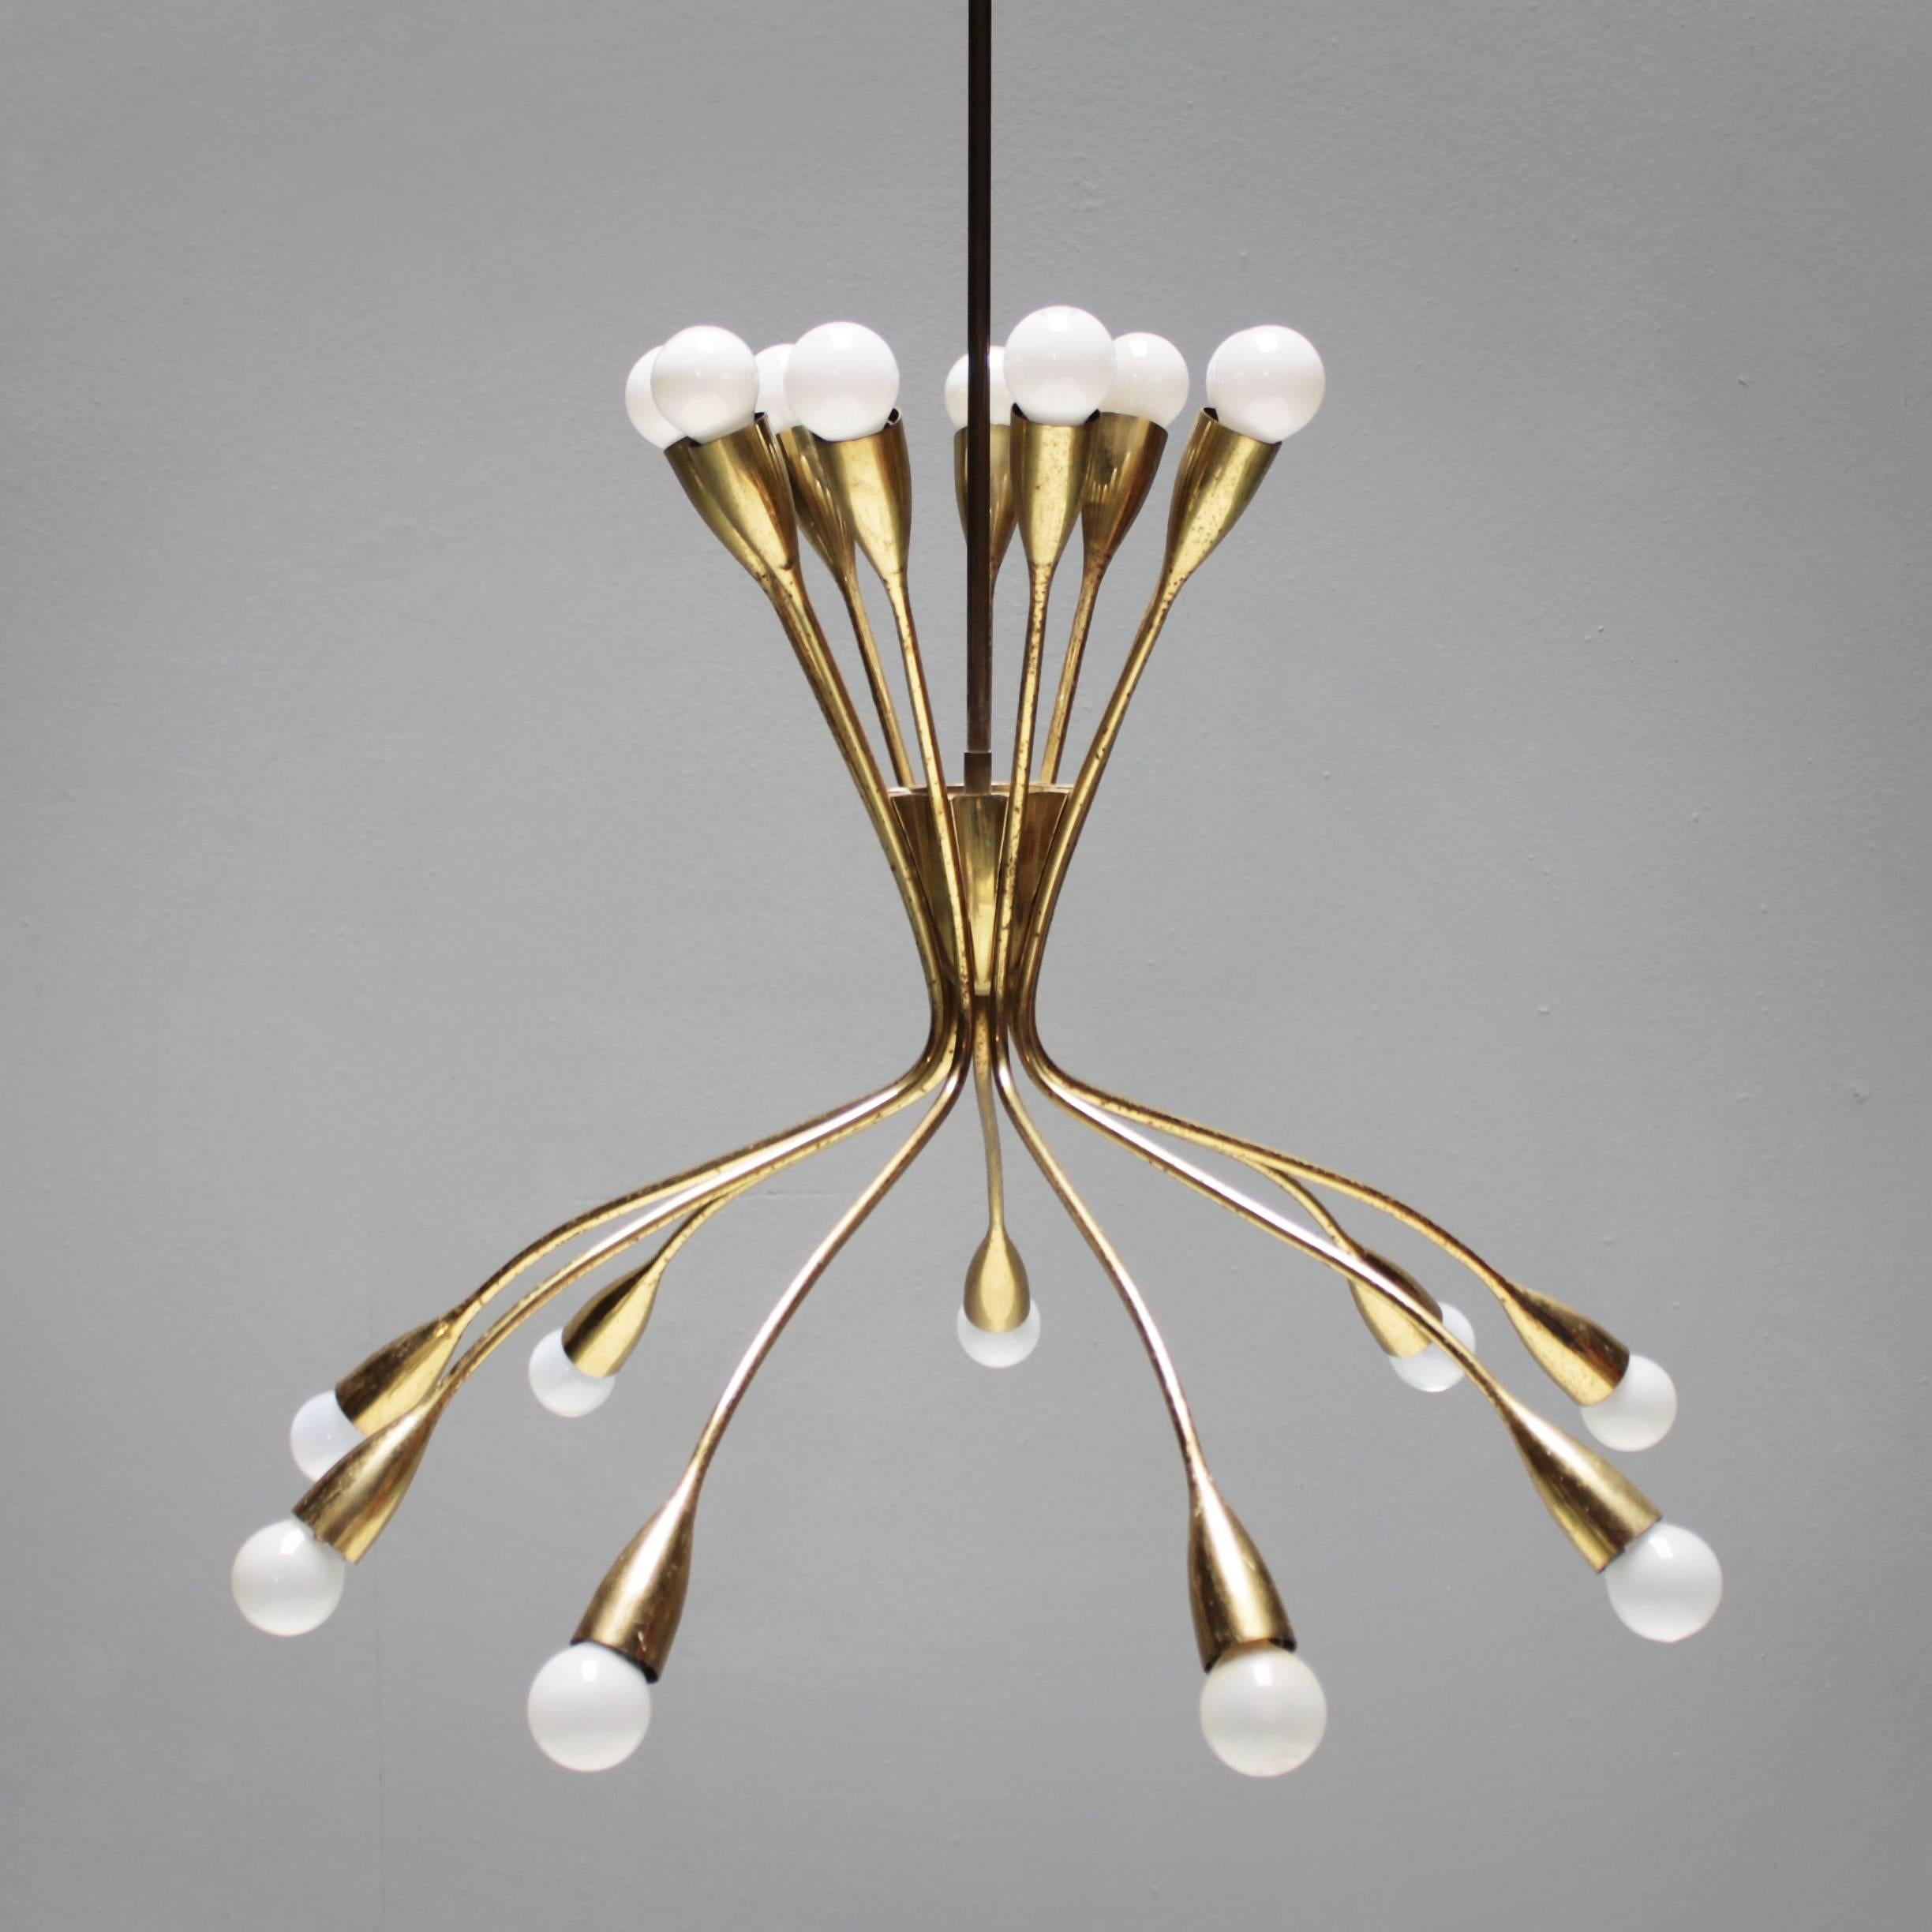 Highly decorative large brass eighteen-light fixture in the style of Stilnovo or Guglielmo Ulrich. Most likely of Italian origin. Measurements: from ceiling till drop 51.6 in. (131 cm), diameter 25.2 inches (64 cm).